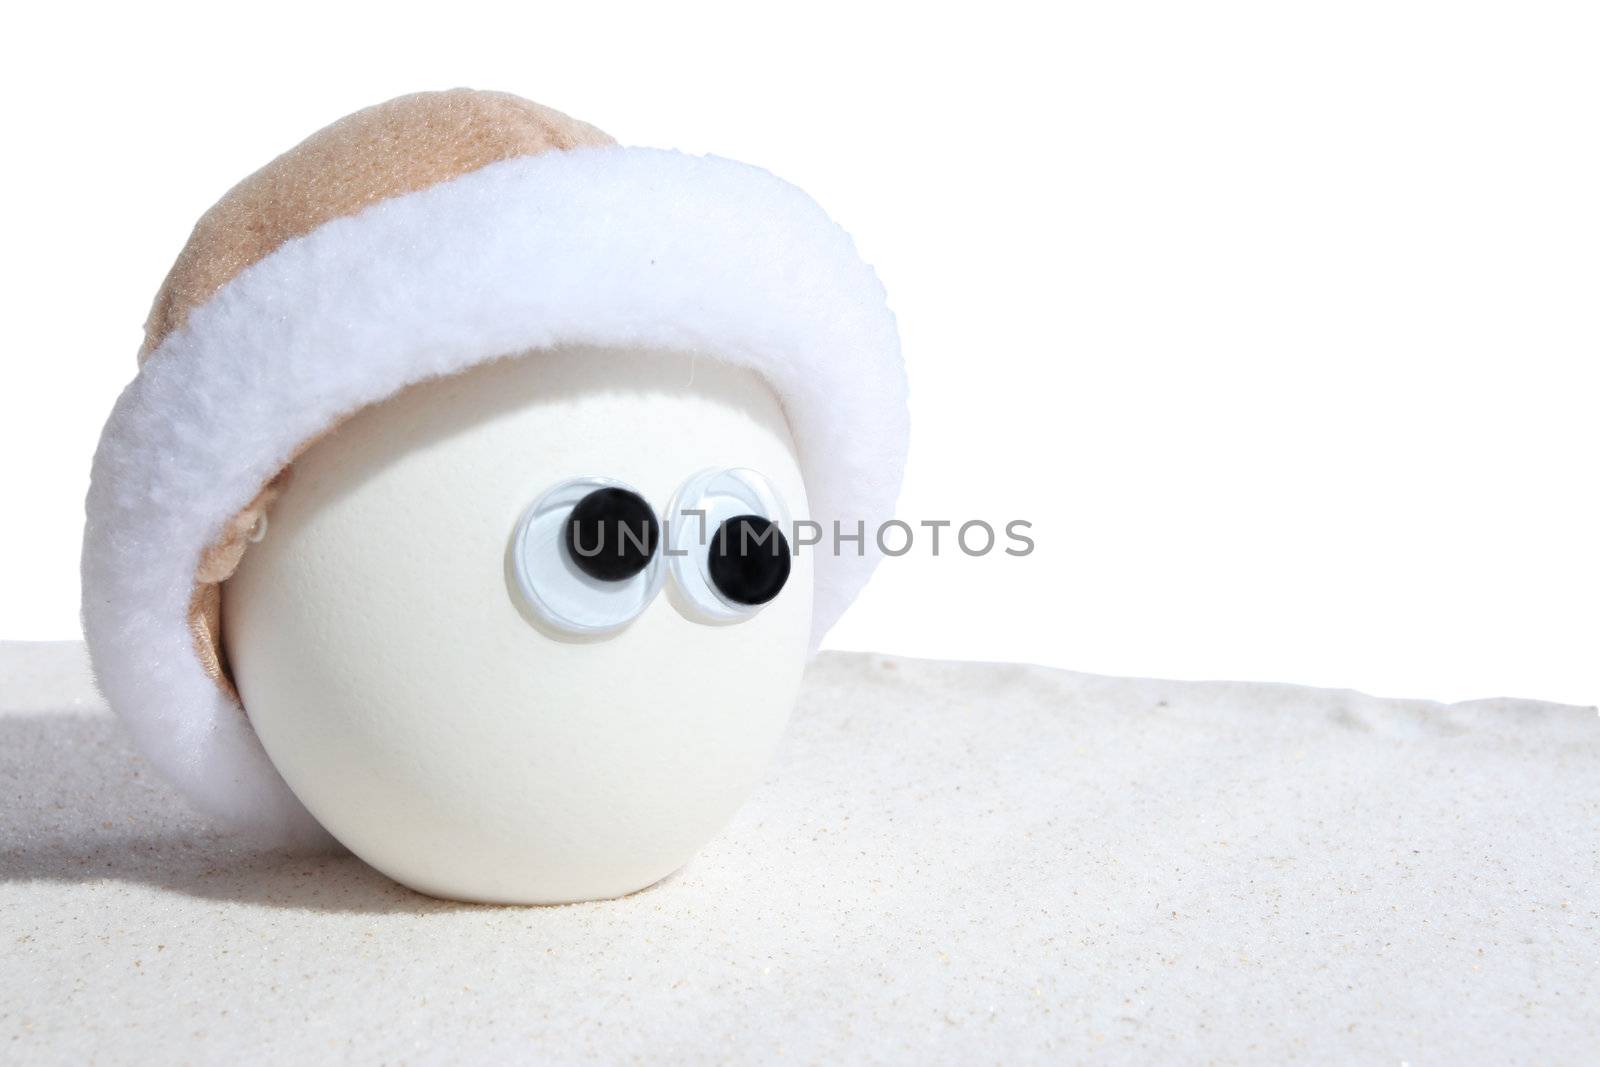 Egg with eyeballs and cap standing on sand. Add own expressions